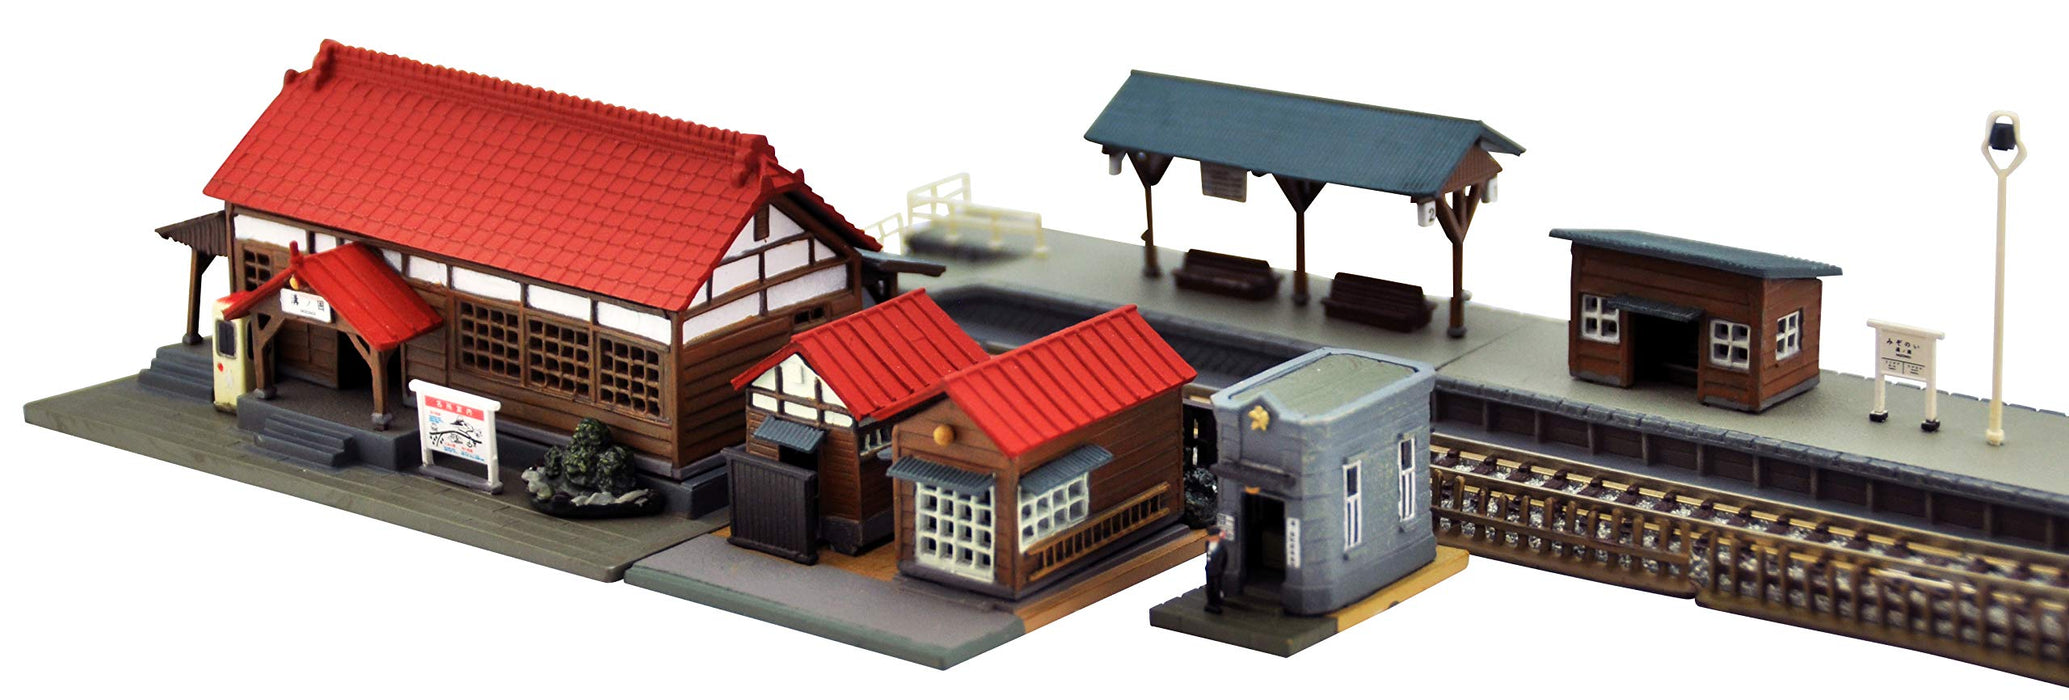 Tomytec Building Collection Kenkore 073-4 Station Set 4 pièces Diorama Fournitures 311805